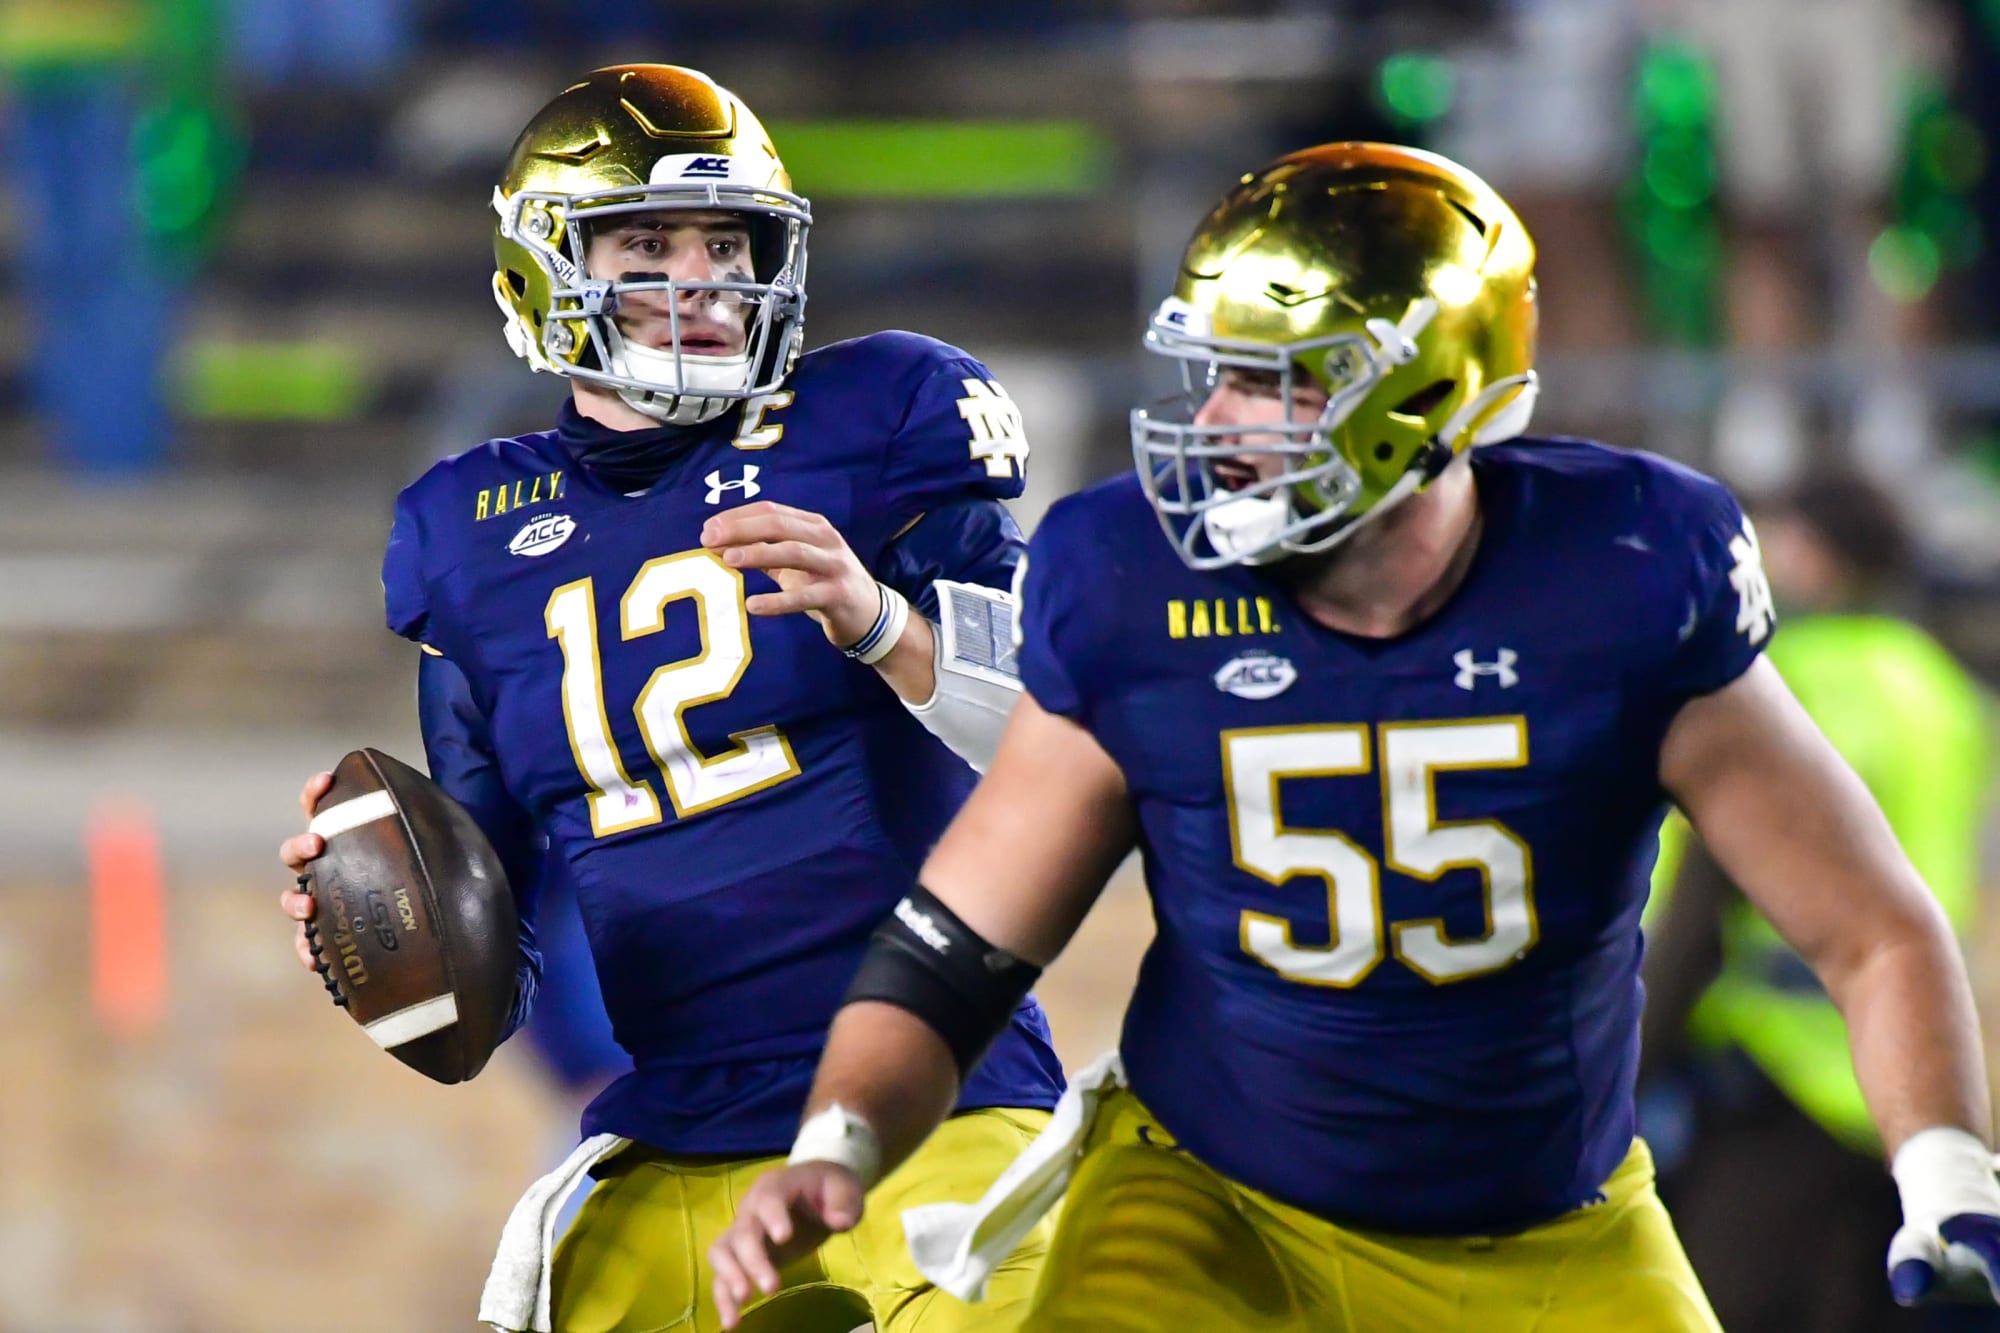 College Football 2020: 5 games with major playoff implications in Week 13